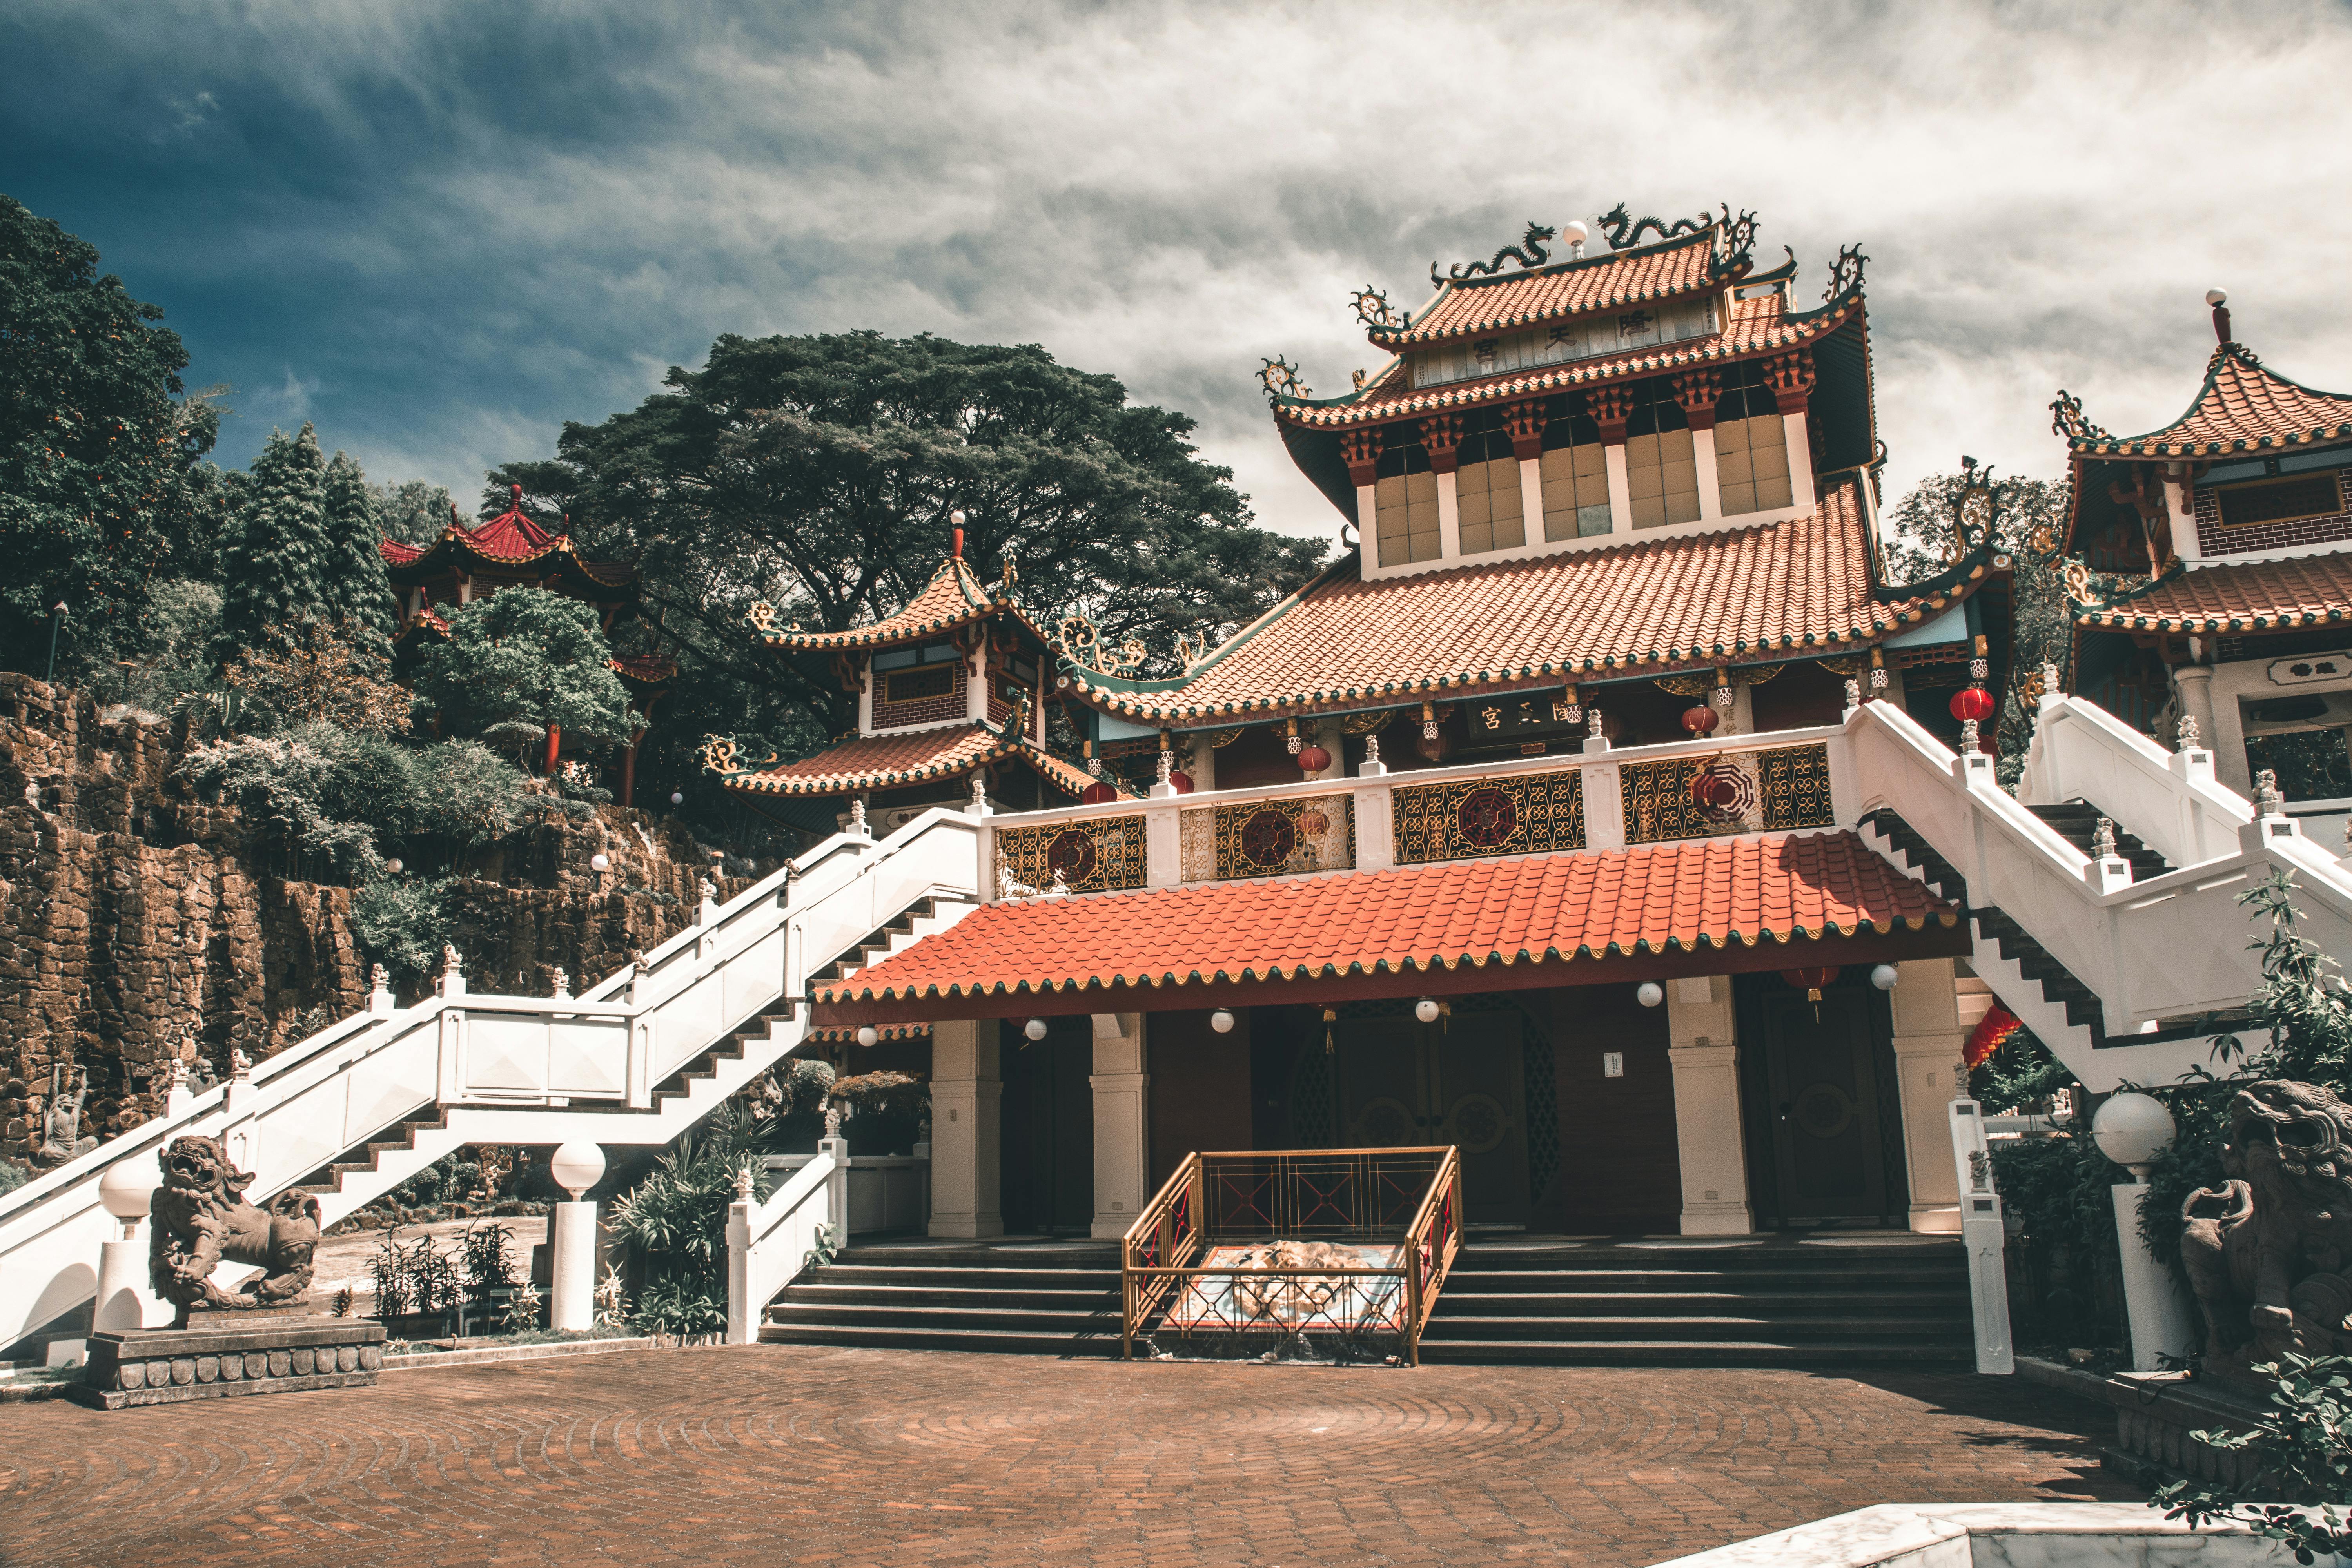 China Photos, Download The BEST Free China Stock Photos & HD Images